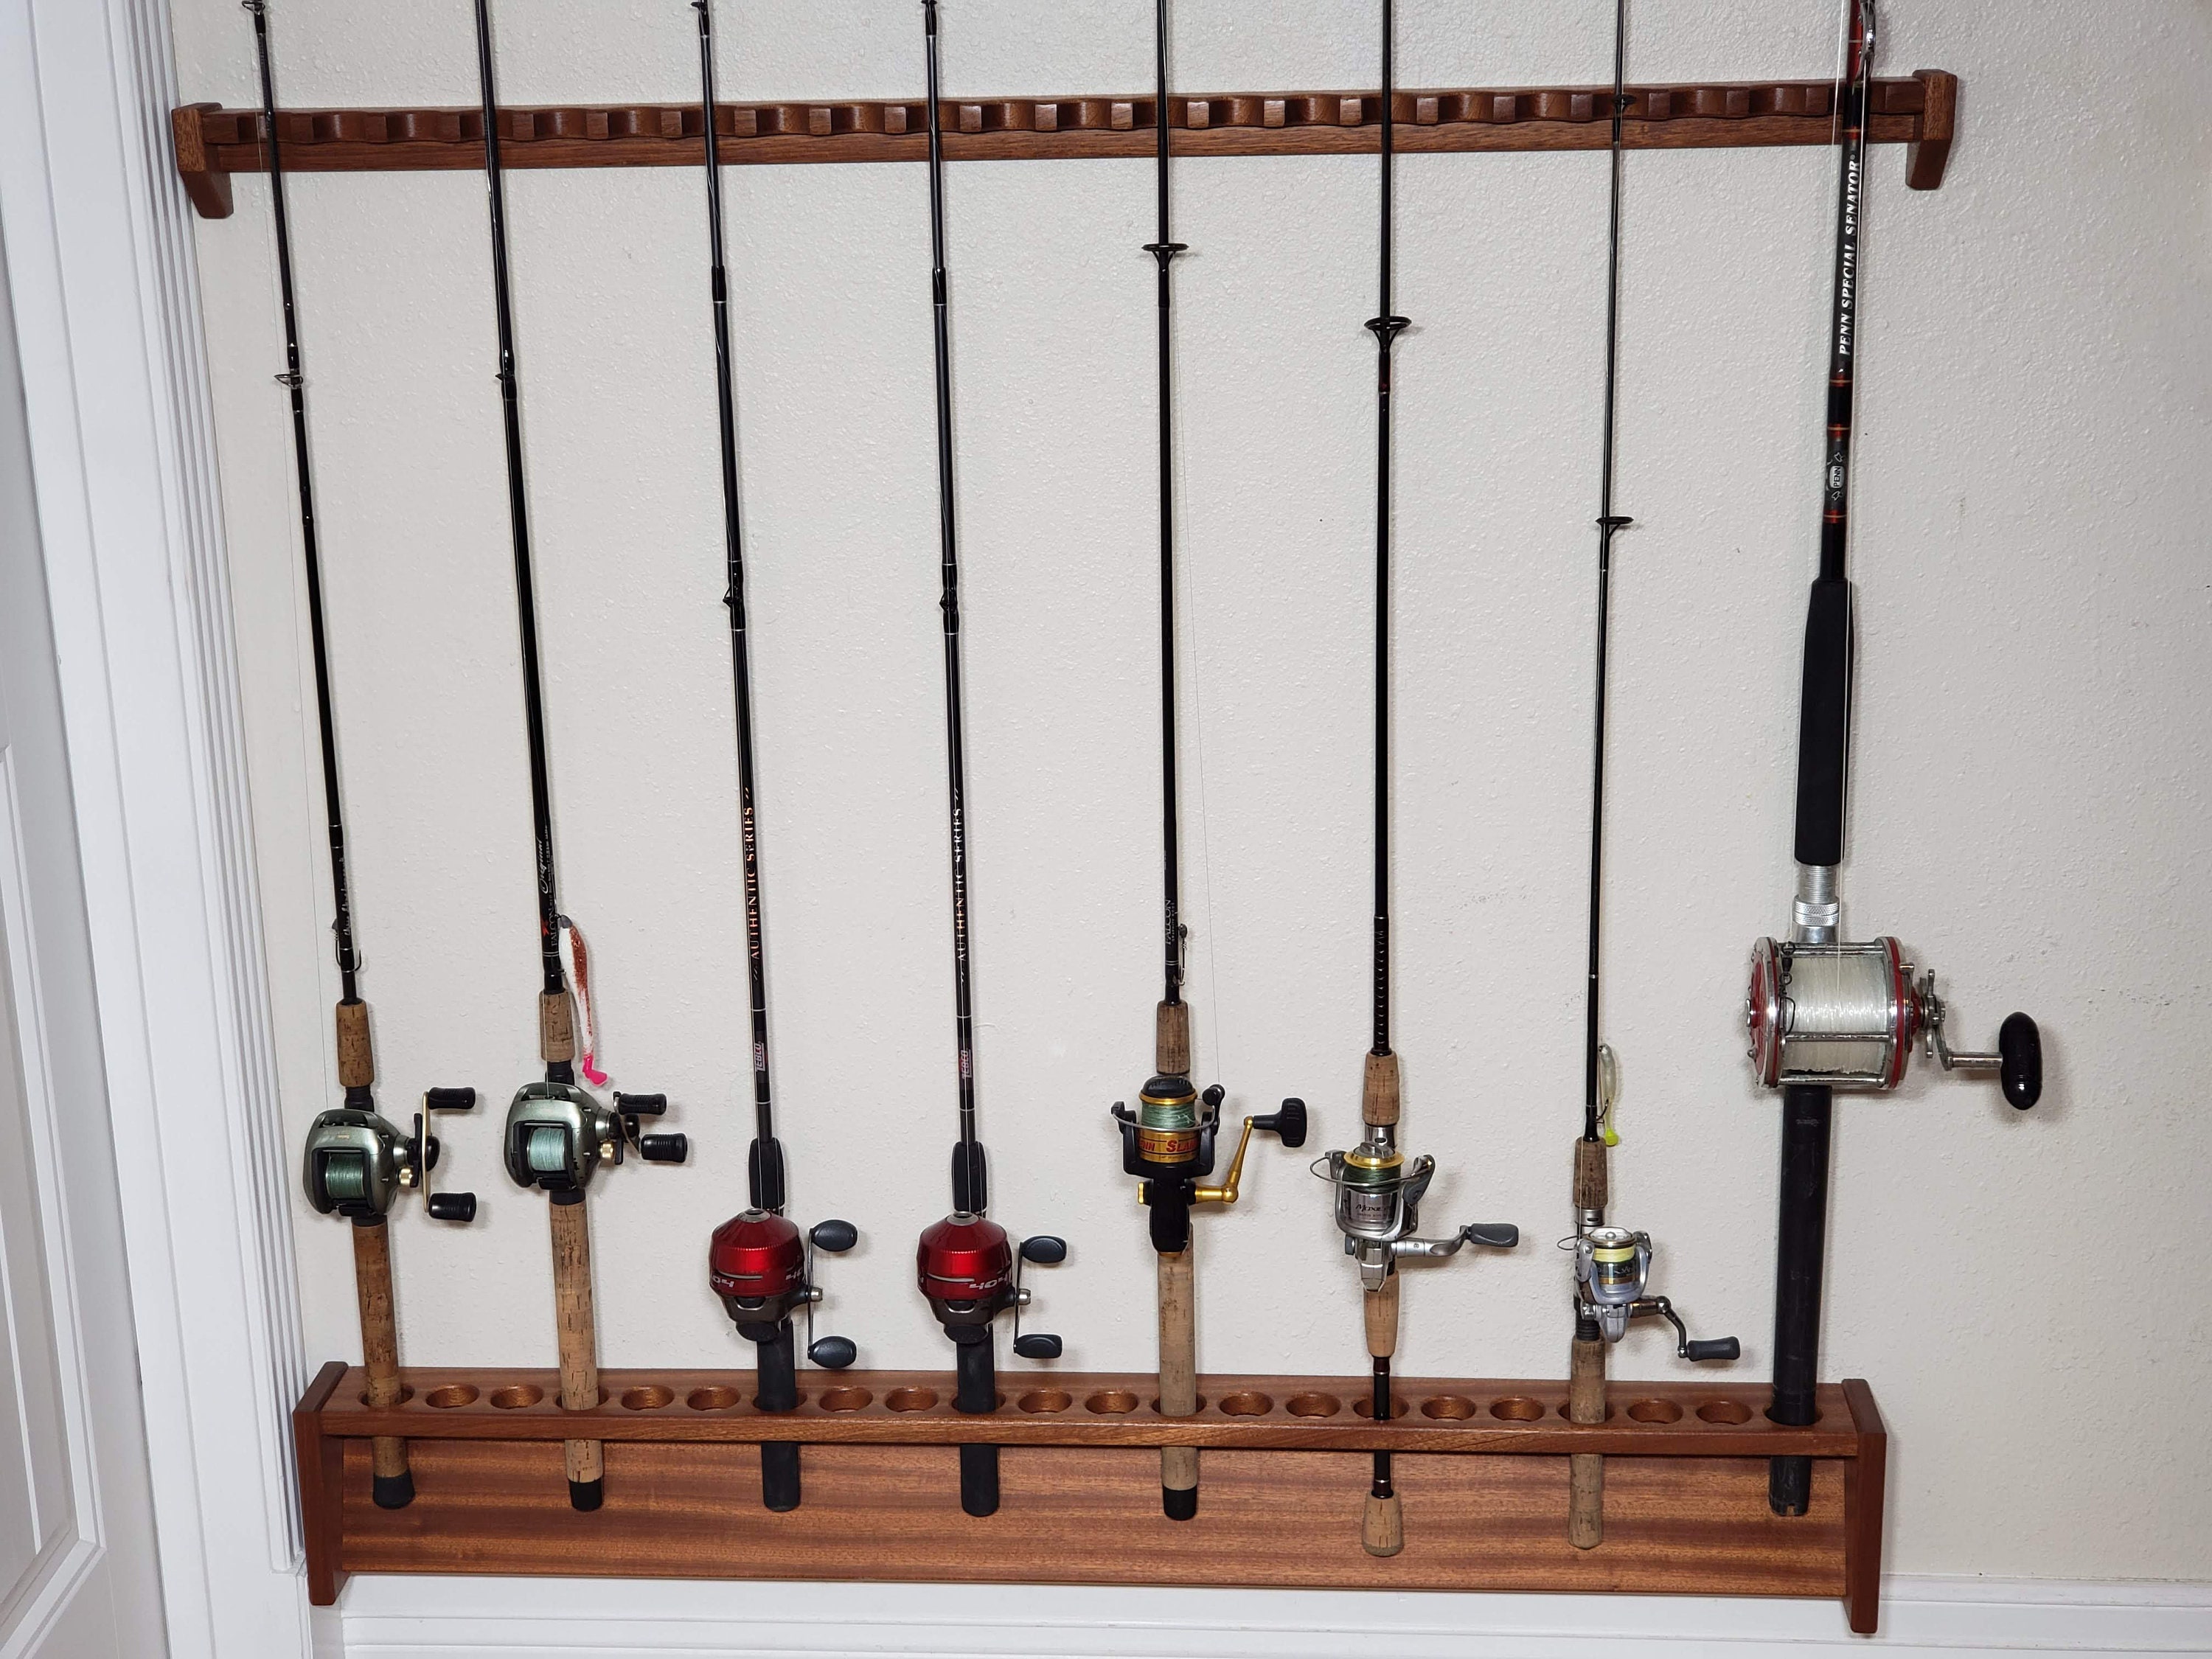 Solid Mahogany Rod Rack, 46 Inch Wall Mounted Built in Fishing Pole Holder,  Real Estate Closing Gift for Fisherman Outdoorsman Hunting Cabin -   Sweden